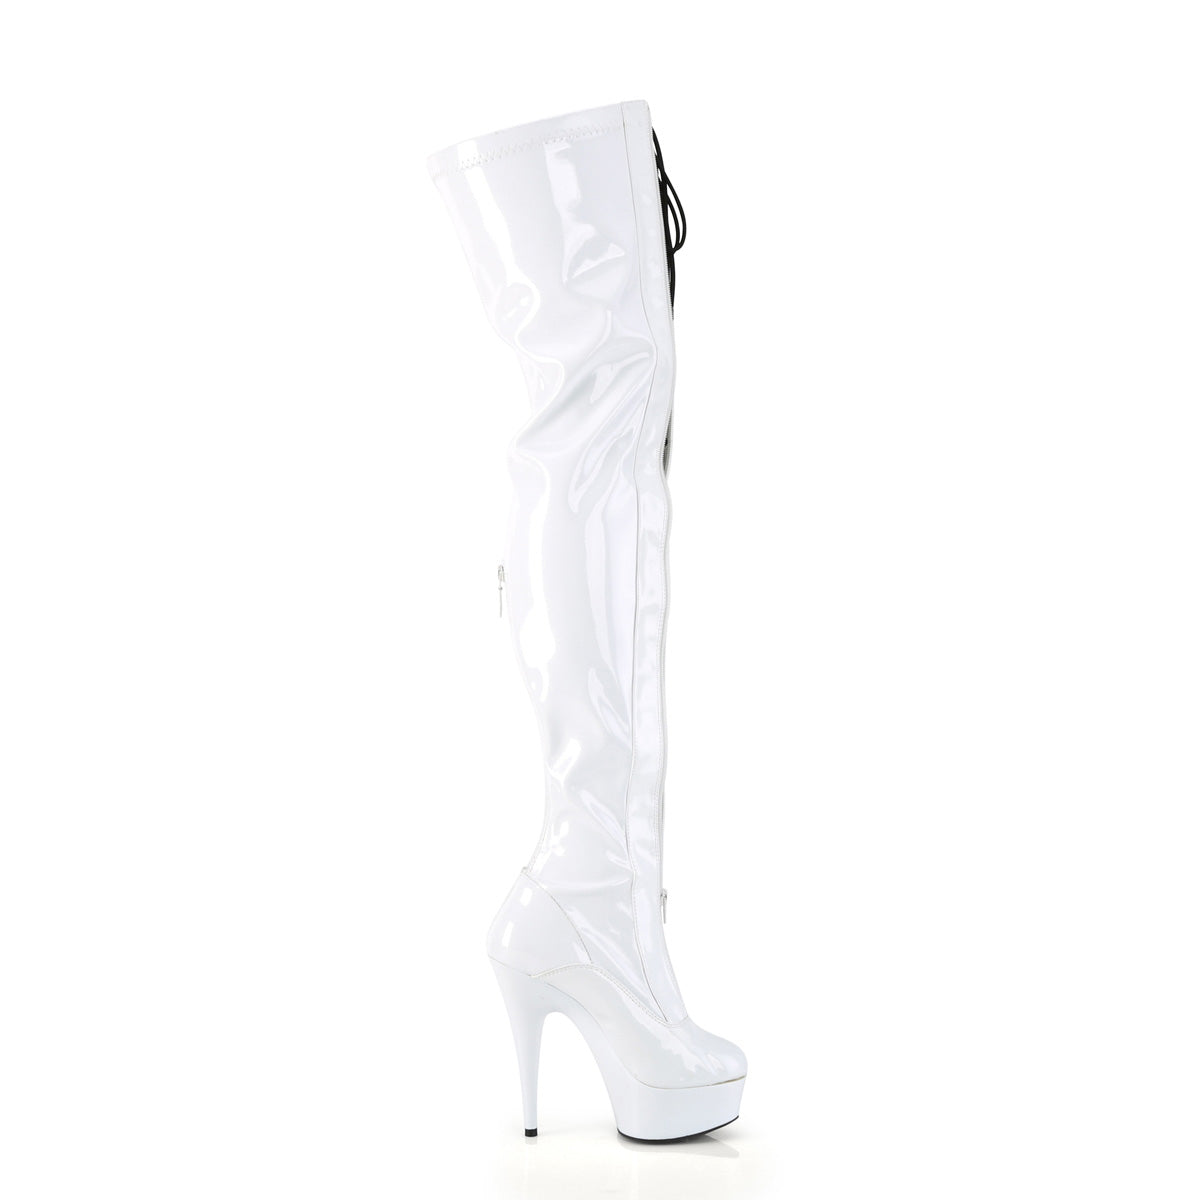 DELIGHT-3027 White-Black Thigh Boots